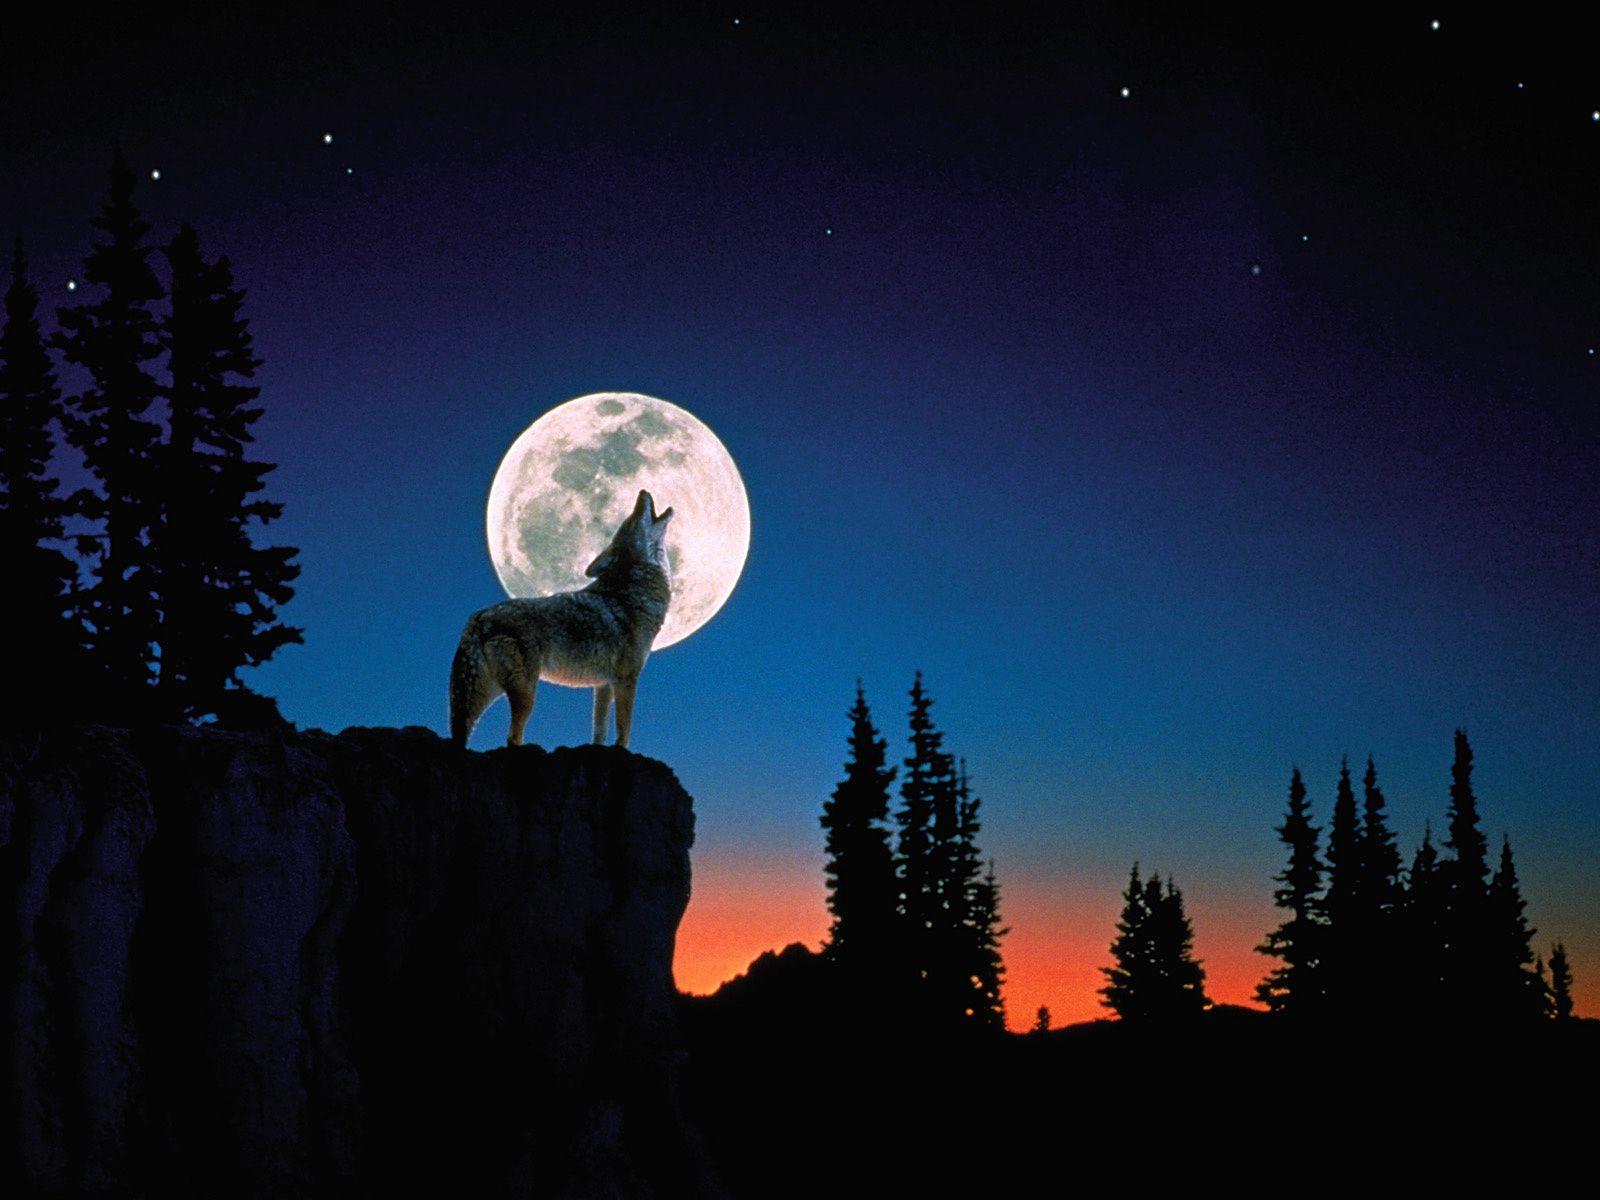 wolf howling at night wallpaper